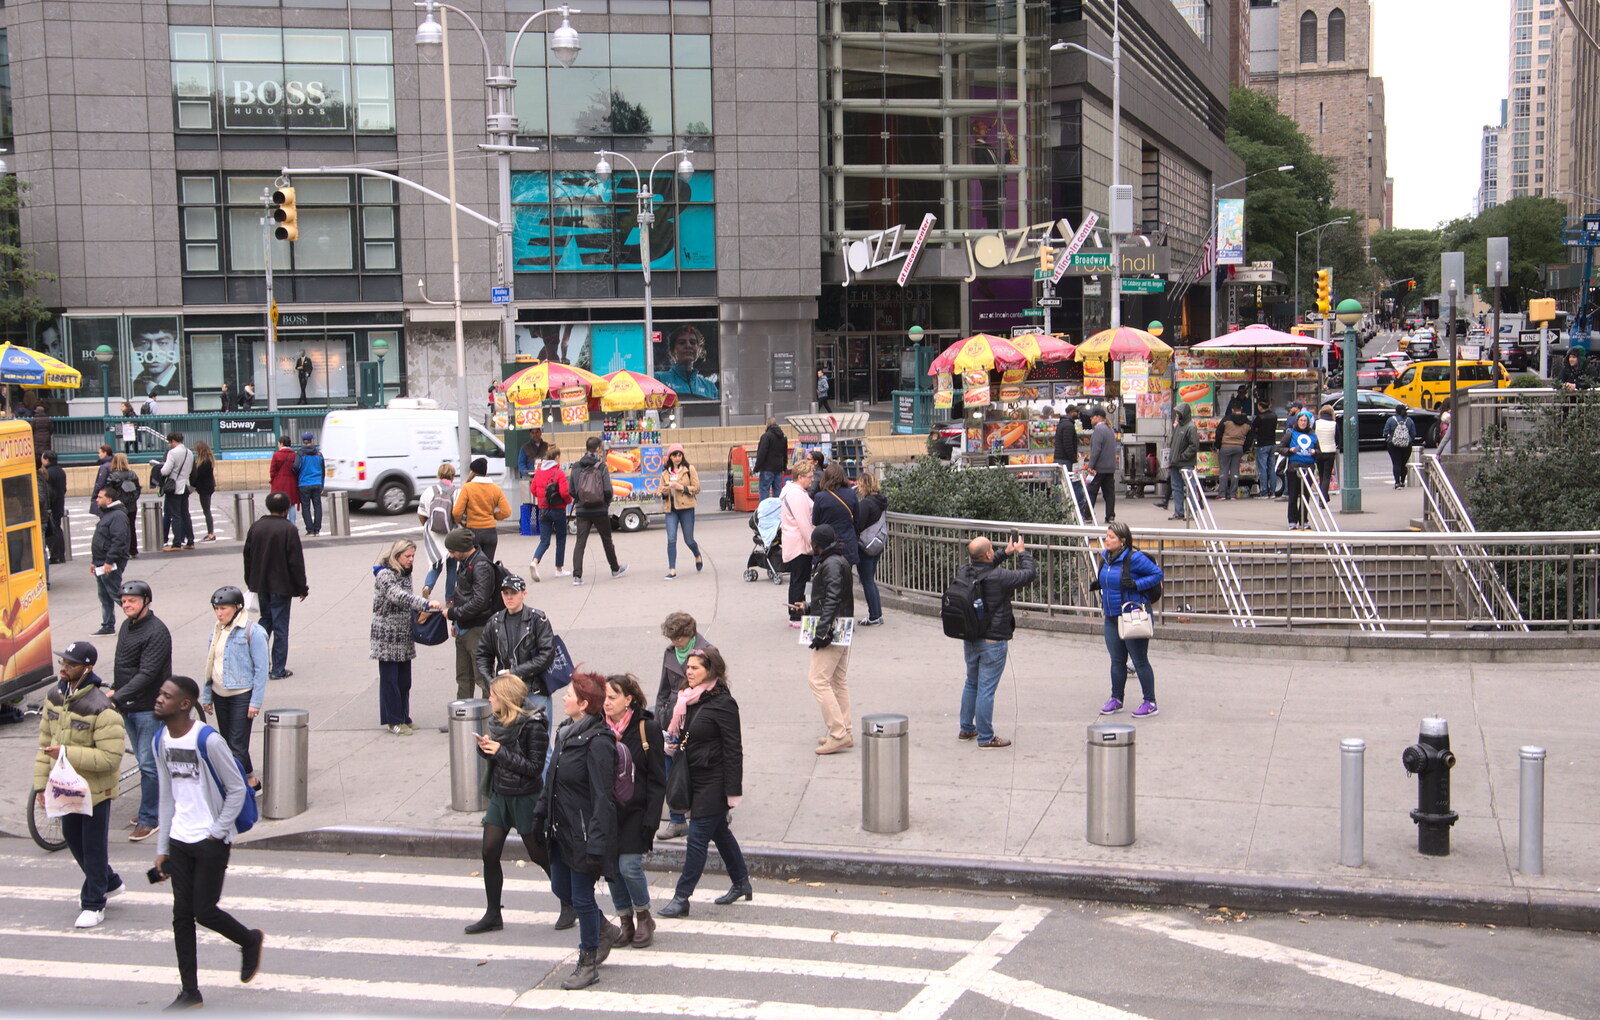 On Columbus Circle from Open-top Buses and a Day at the Museum, New York, United States - 22nd October 2018